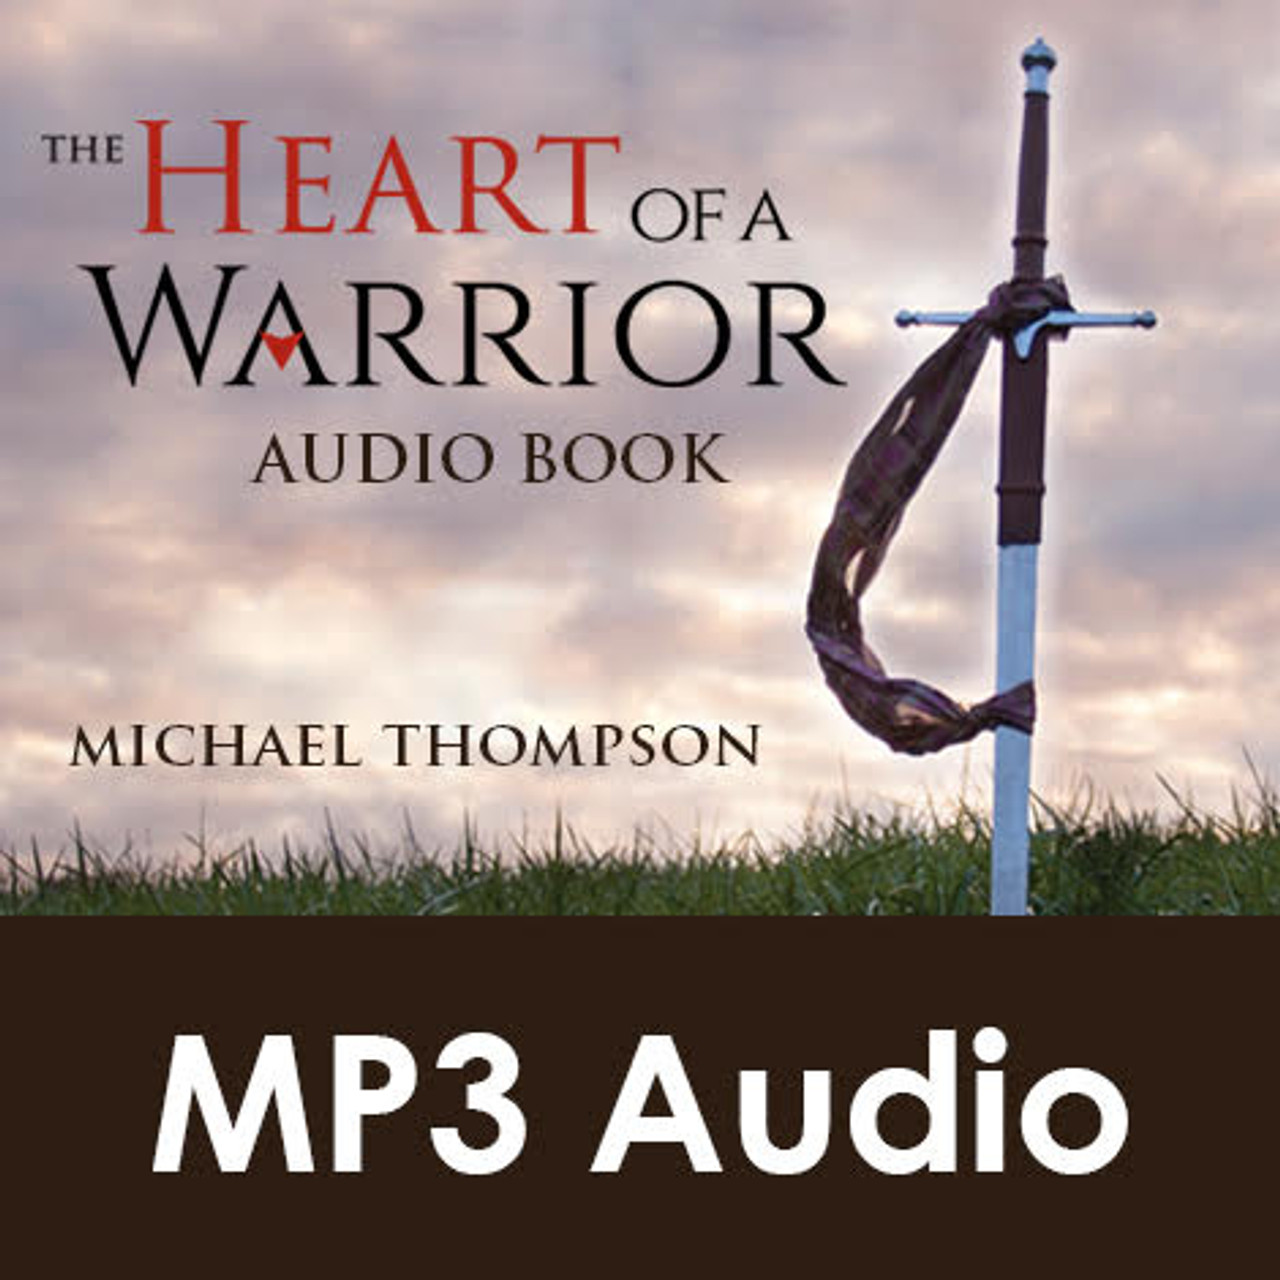 The Heart of a Warrior - Wikipedia